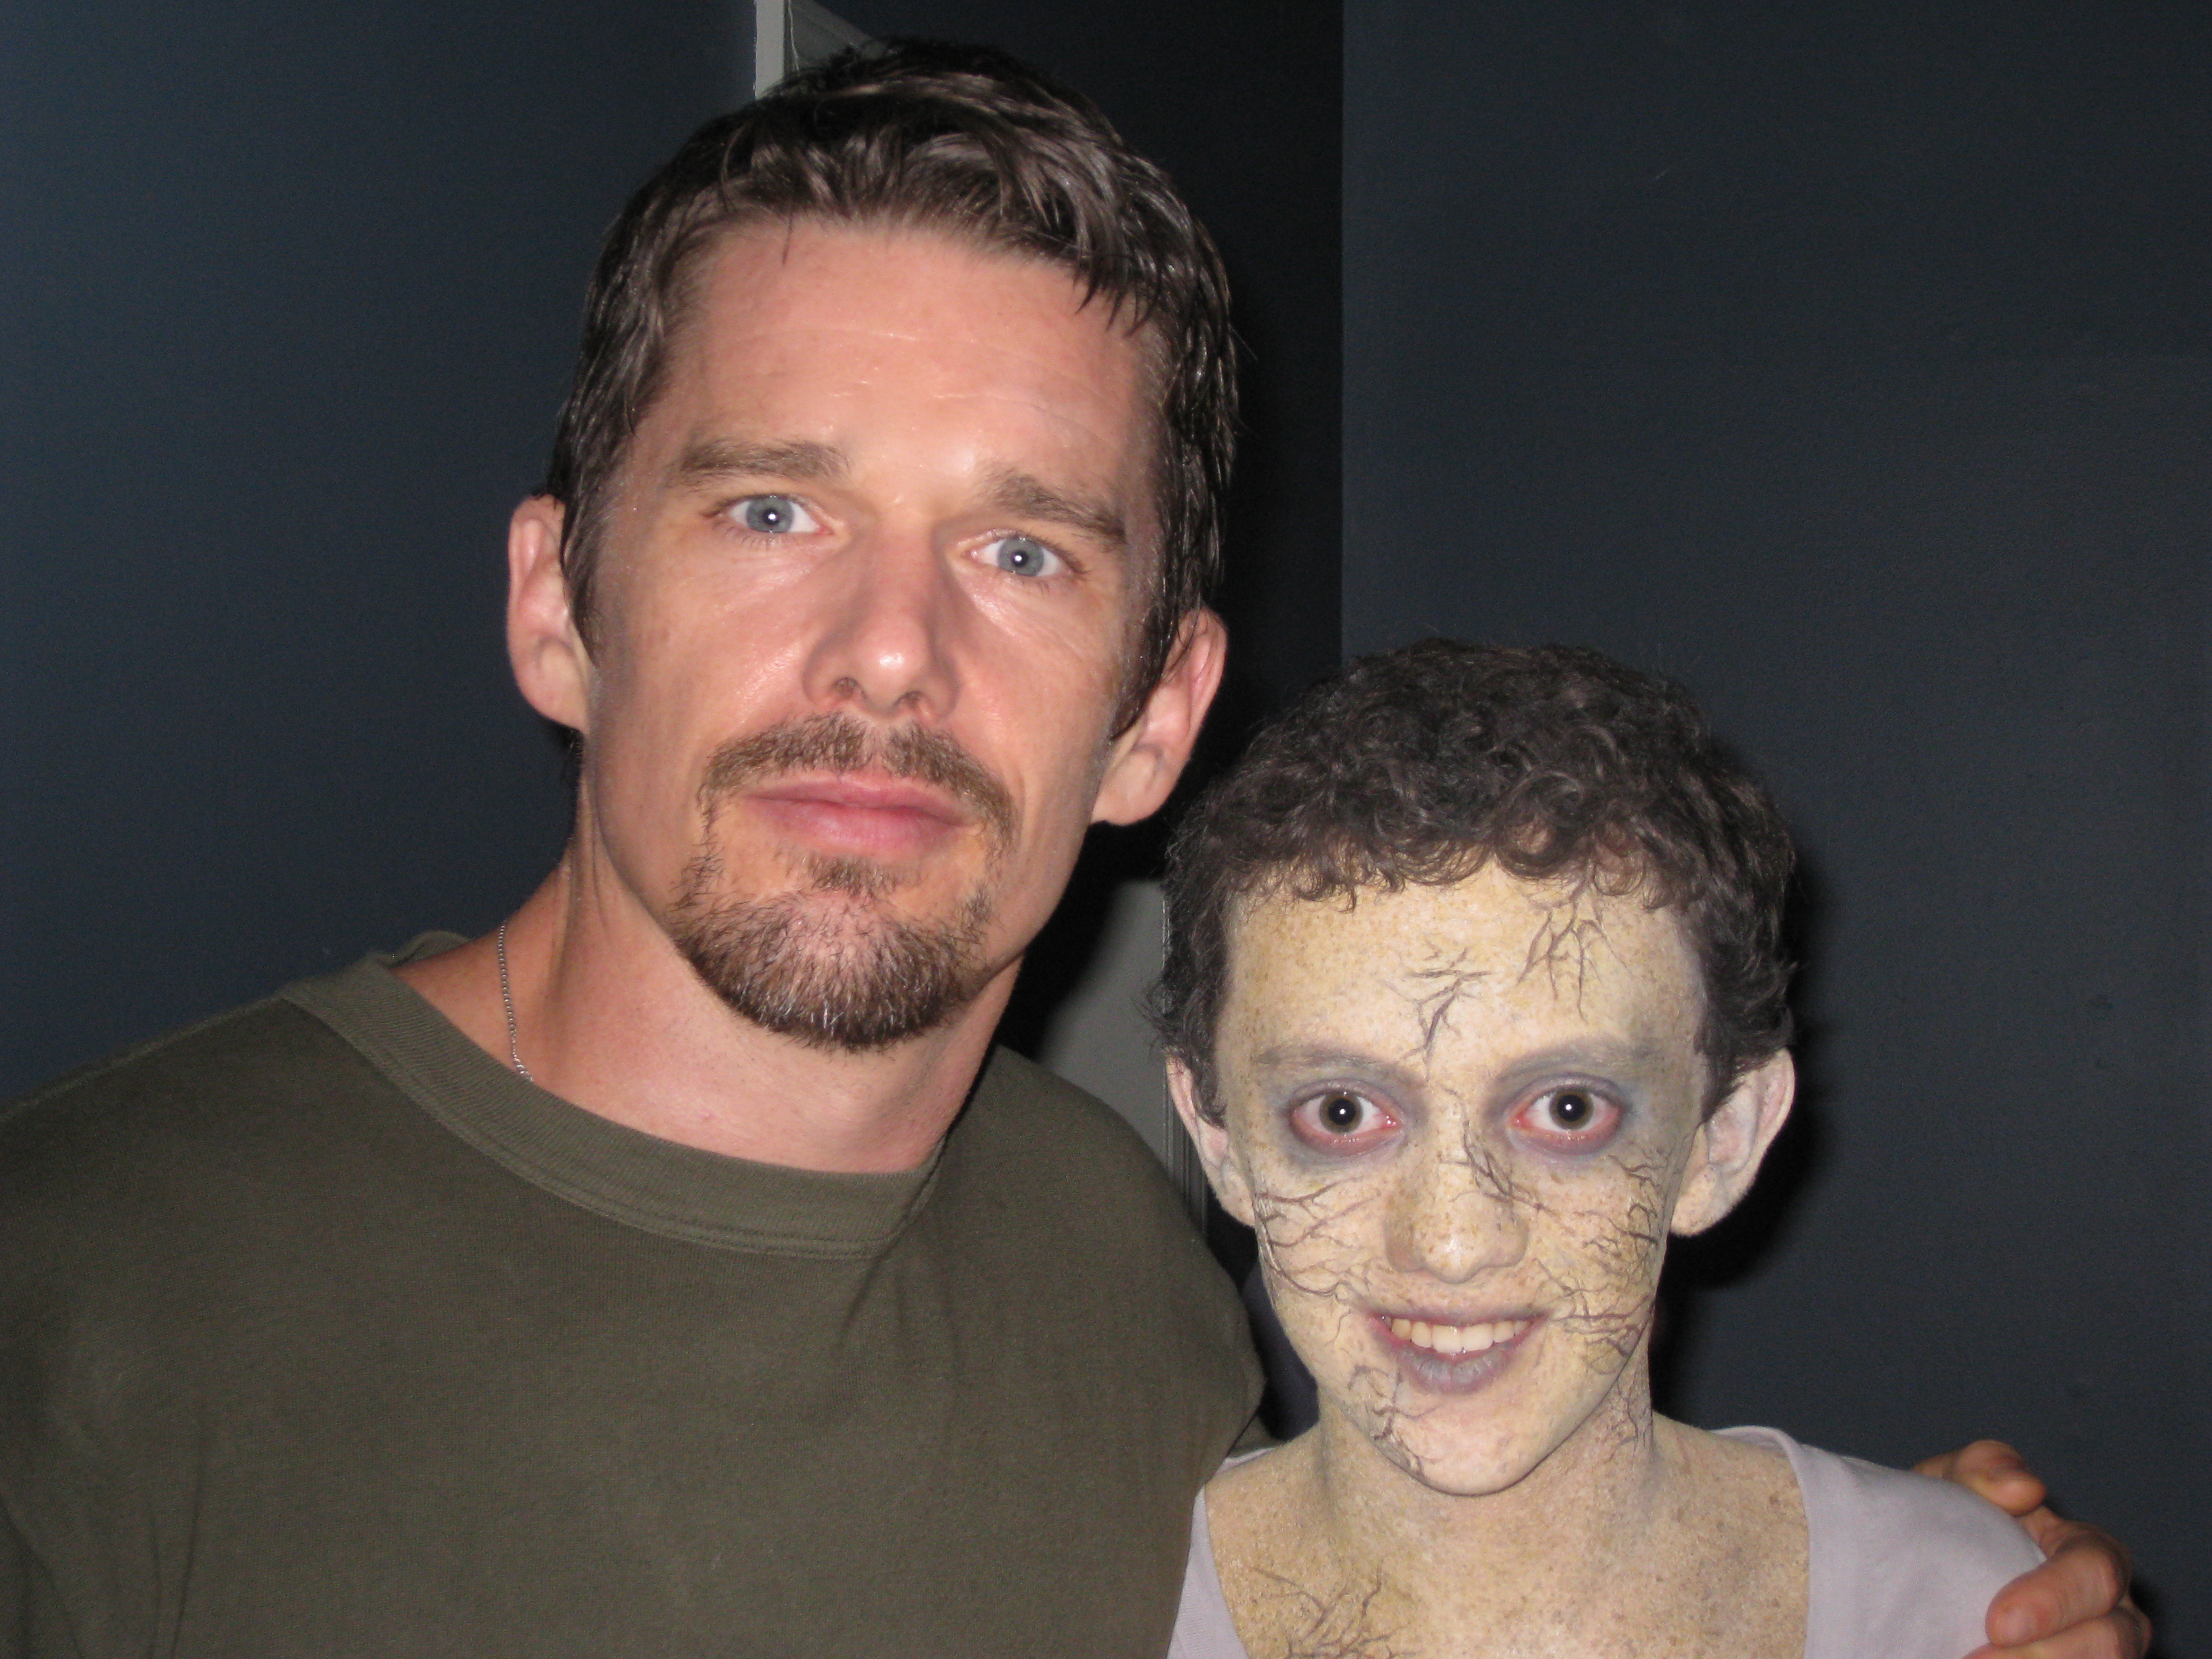 On set of Sinister with Ethan Hawke